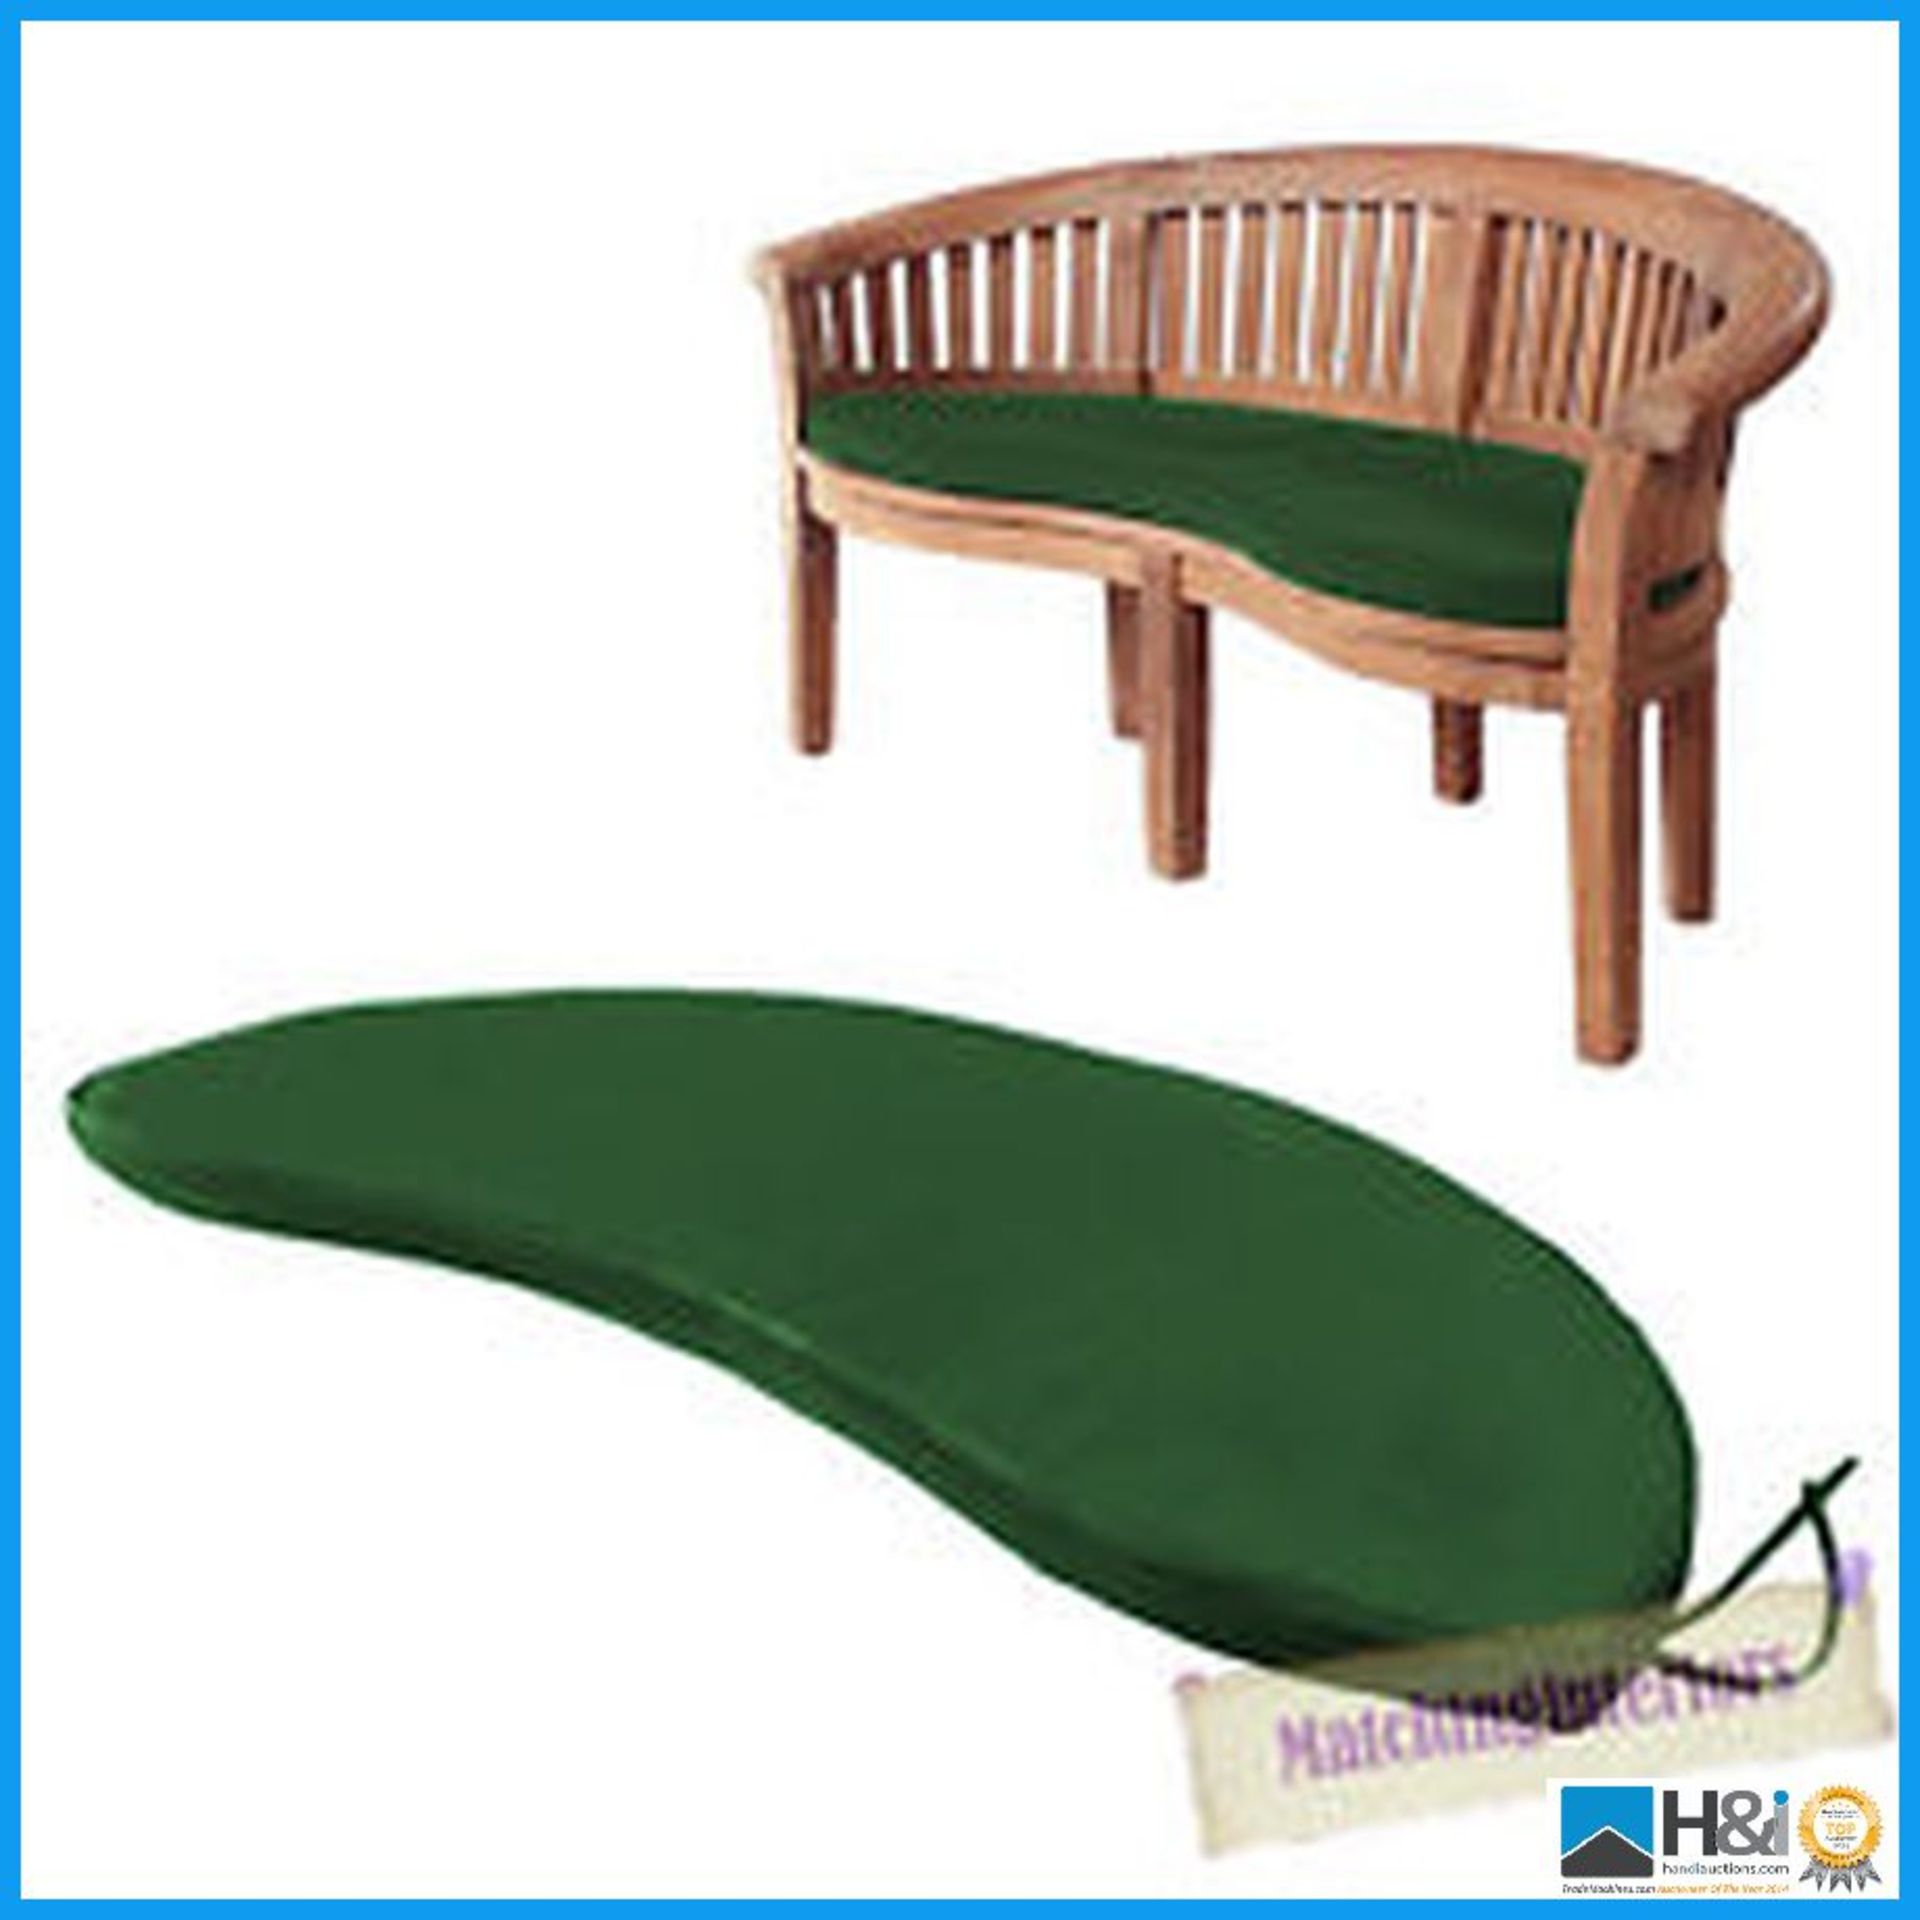 Cushion for Banana bench /. Made from Showerproof Polyester cover filled with high quality foam. For